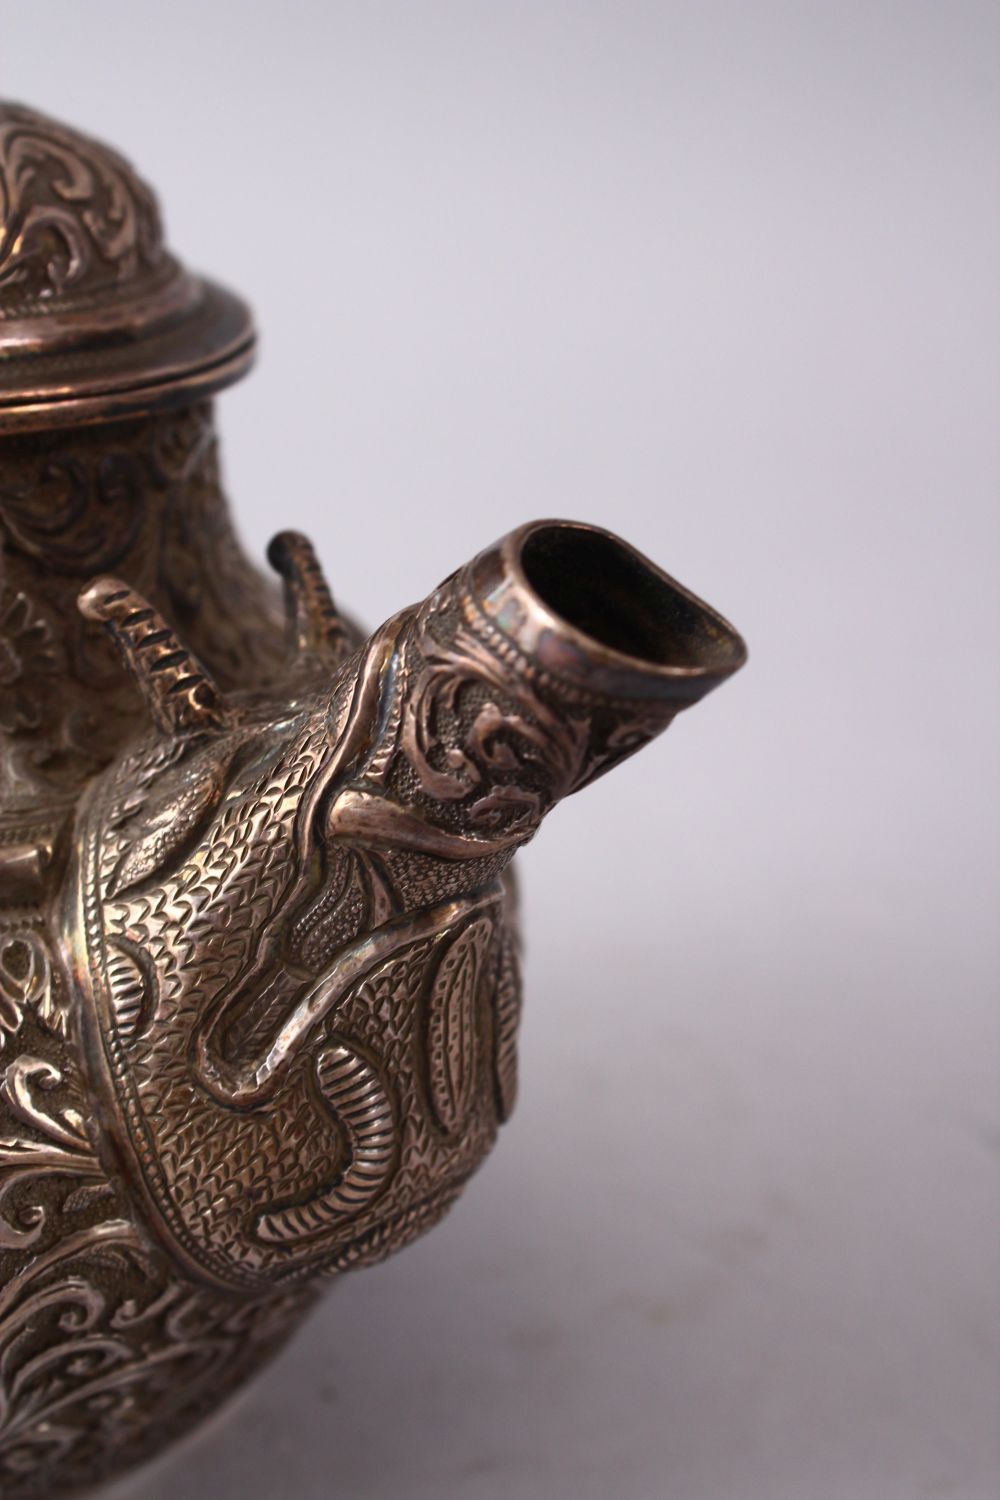 A GOOD 19TH CENTURY TURKISH SOLID SILVER TEAPOT carved with formal foliage and a dog style handle, - Image 8 of 10